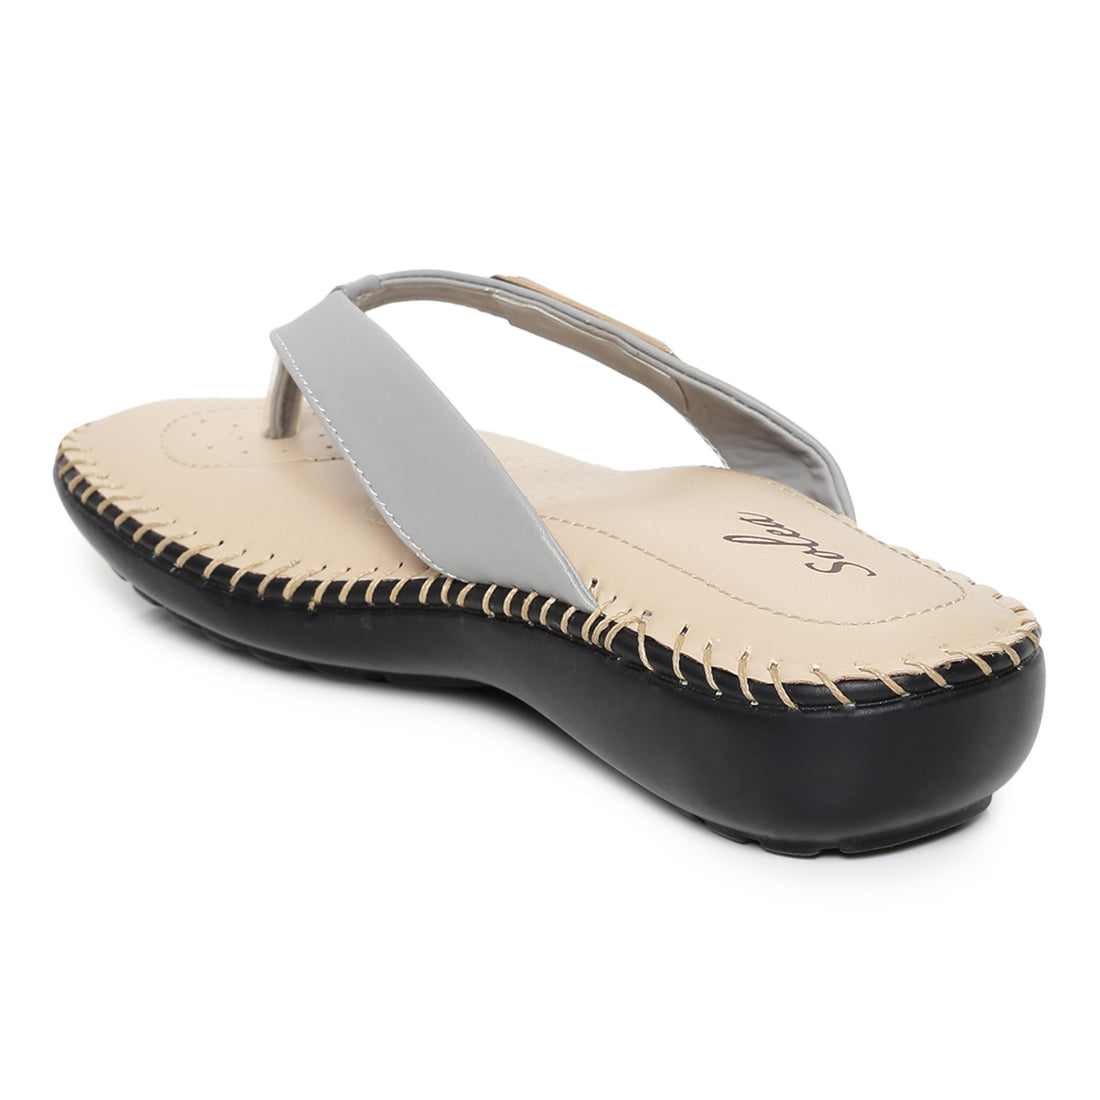 Paragon  K6013L Women Sandals | Casual &amp; Formal Sandals | Stylish, Comfortable &amp; Durable | For Daily &amp; Occasion Wear